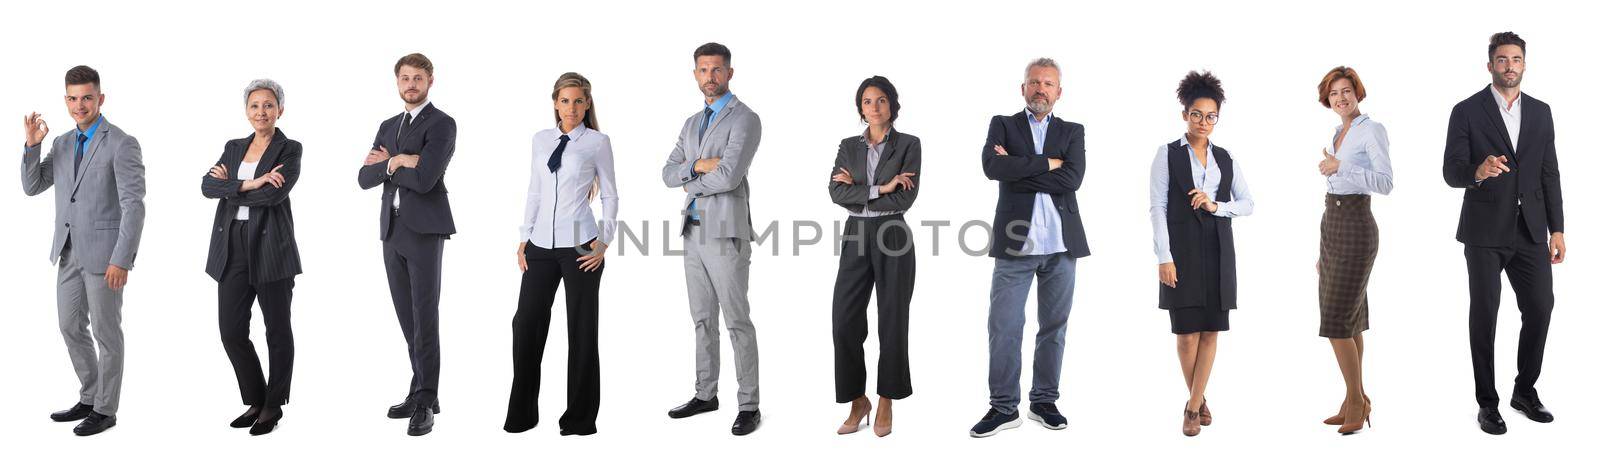 Business people set on white by ALotOfPeople